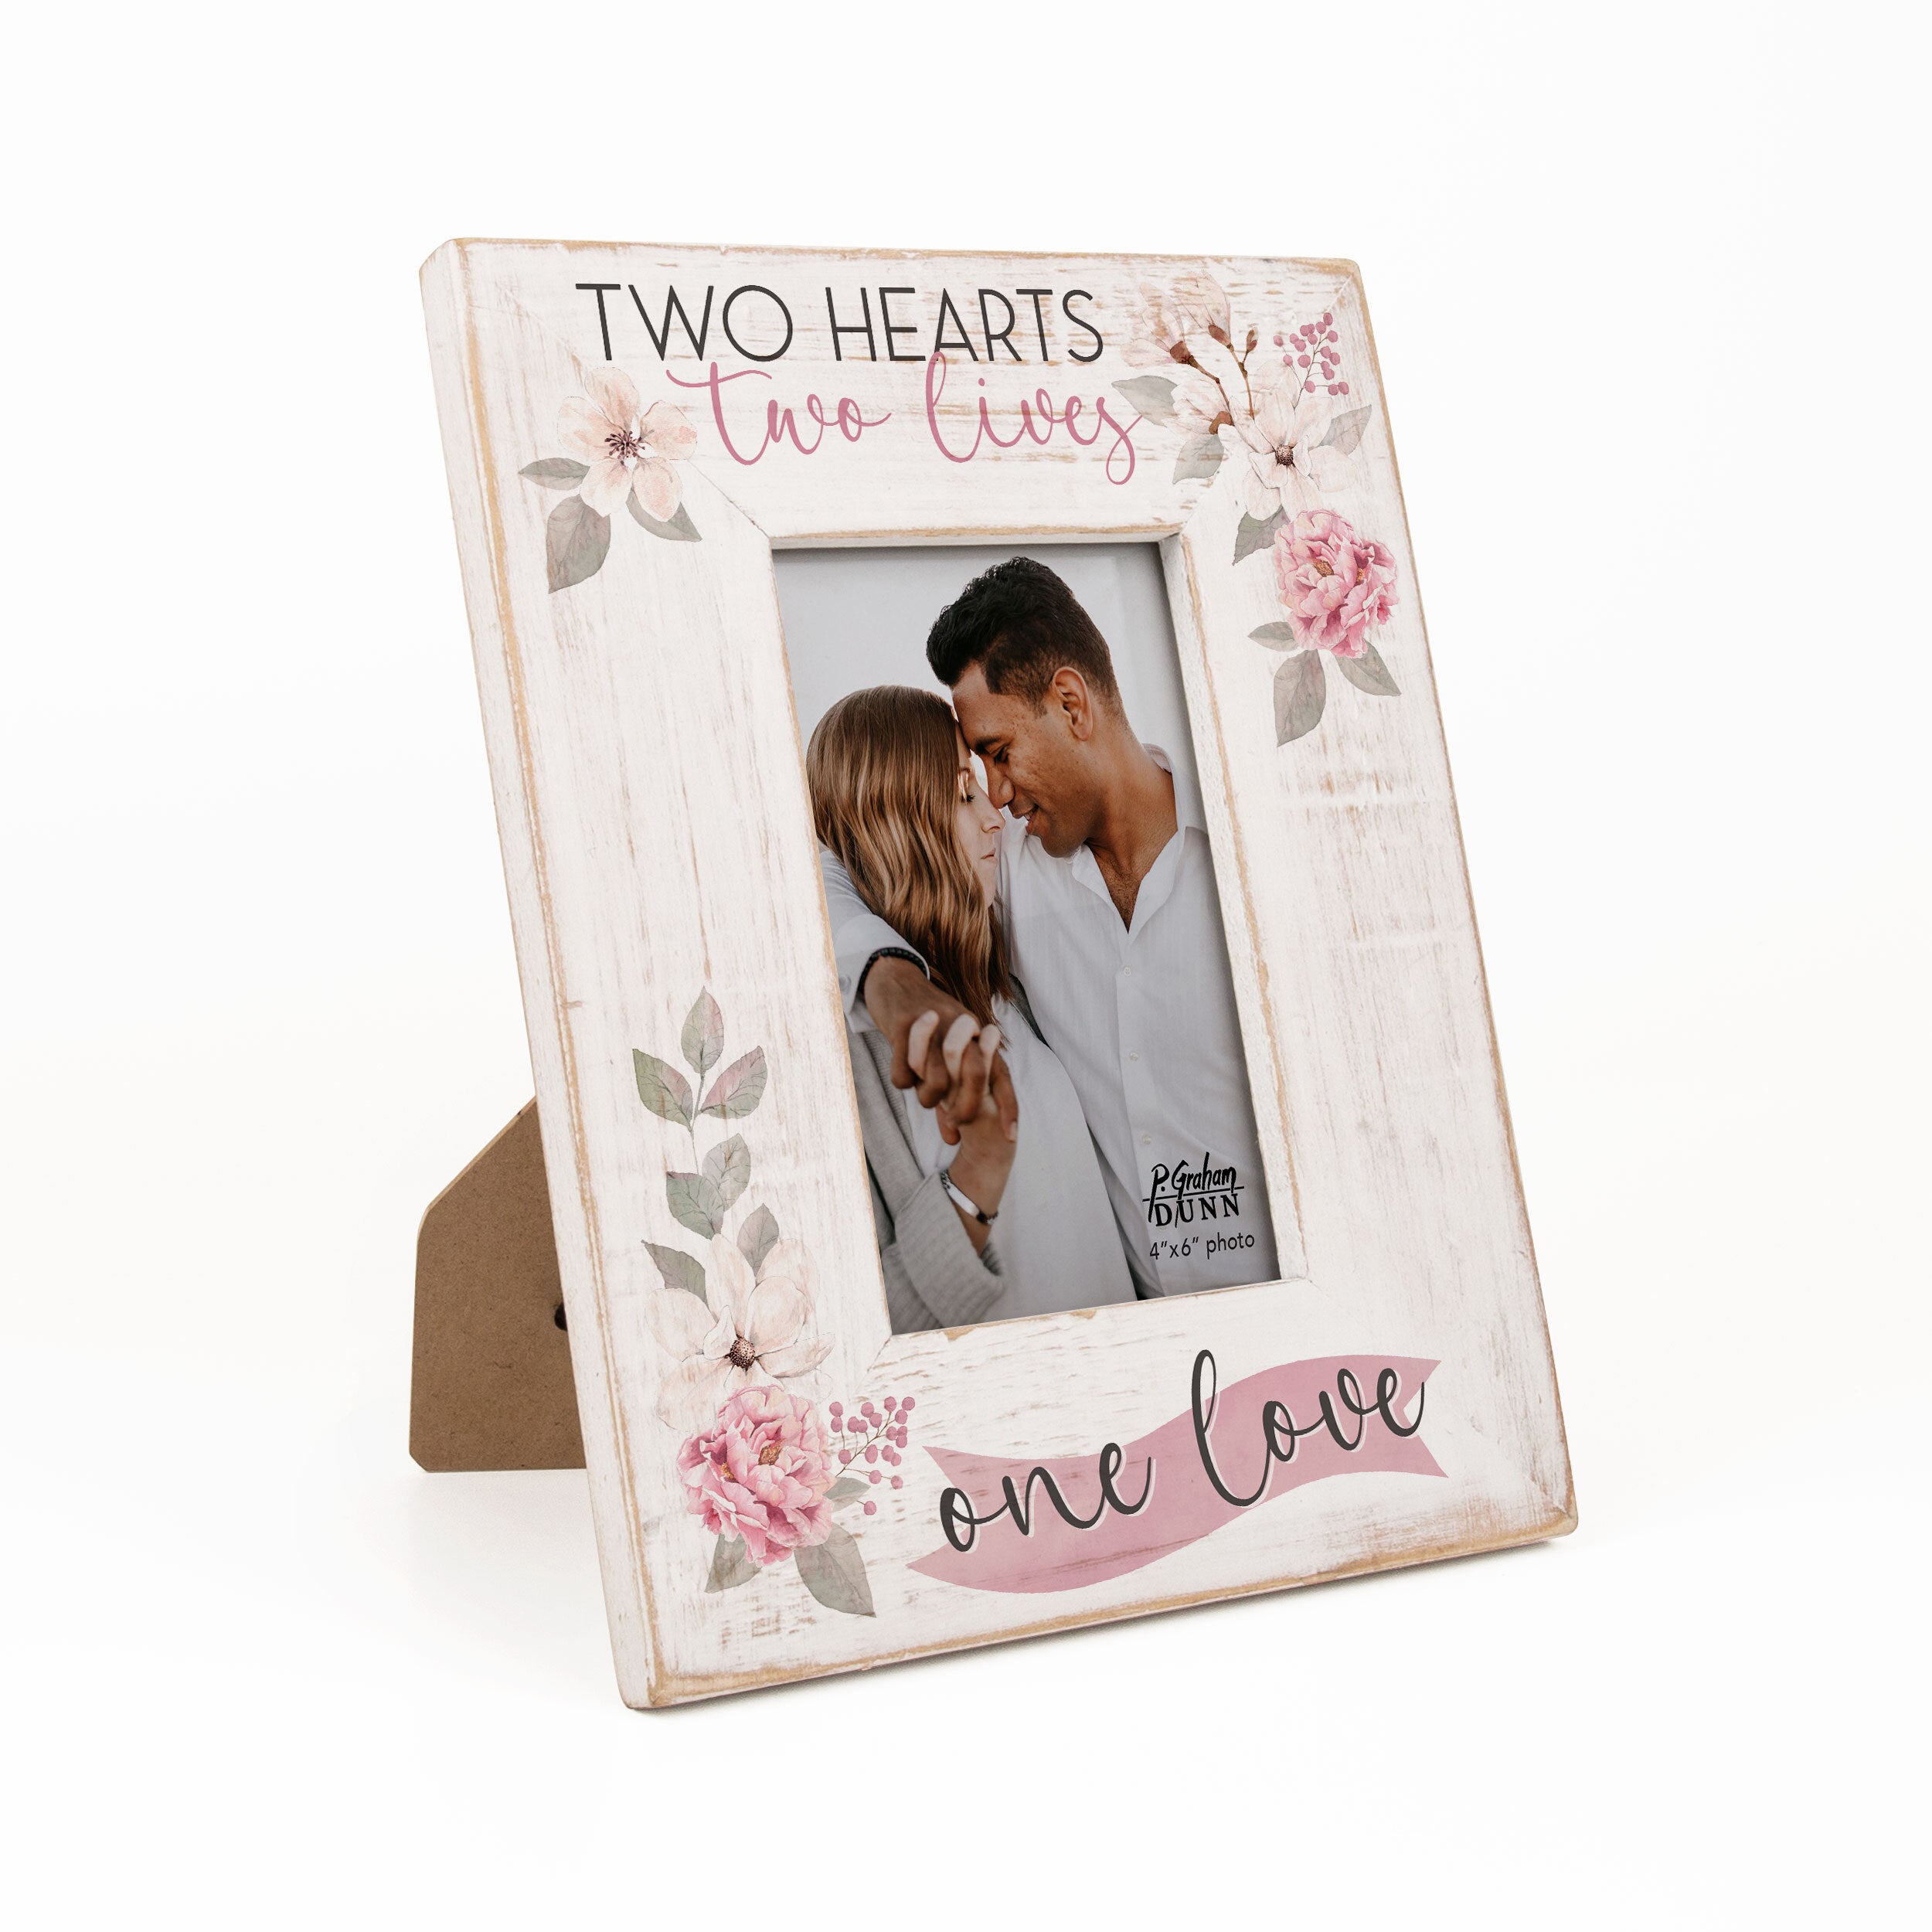 *Two Hearts Two Lives One Love Photo Frame (4x6 Photo)